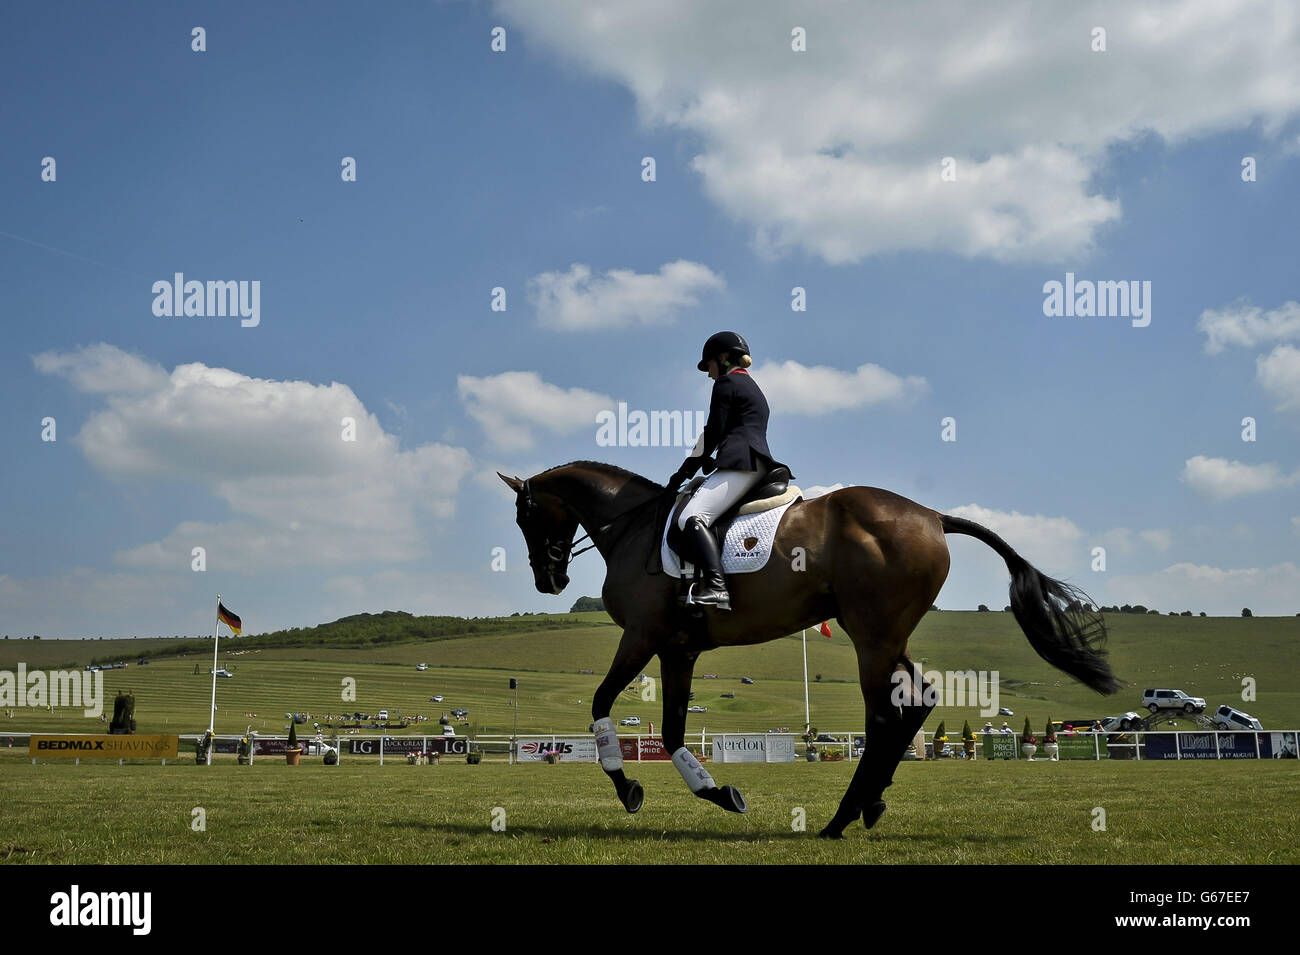 Laura Collett parades in the main arena on former racehorse Kauto Star during day four of the Barbury International Horse Trials at Barbury Castle, Wiltshire. Stock Photo